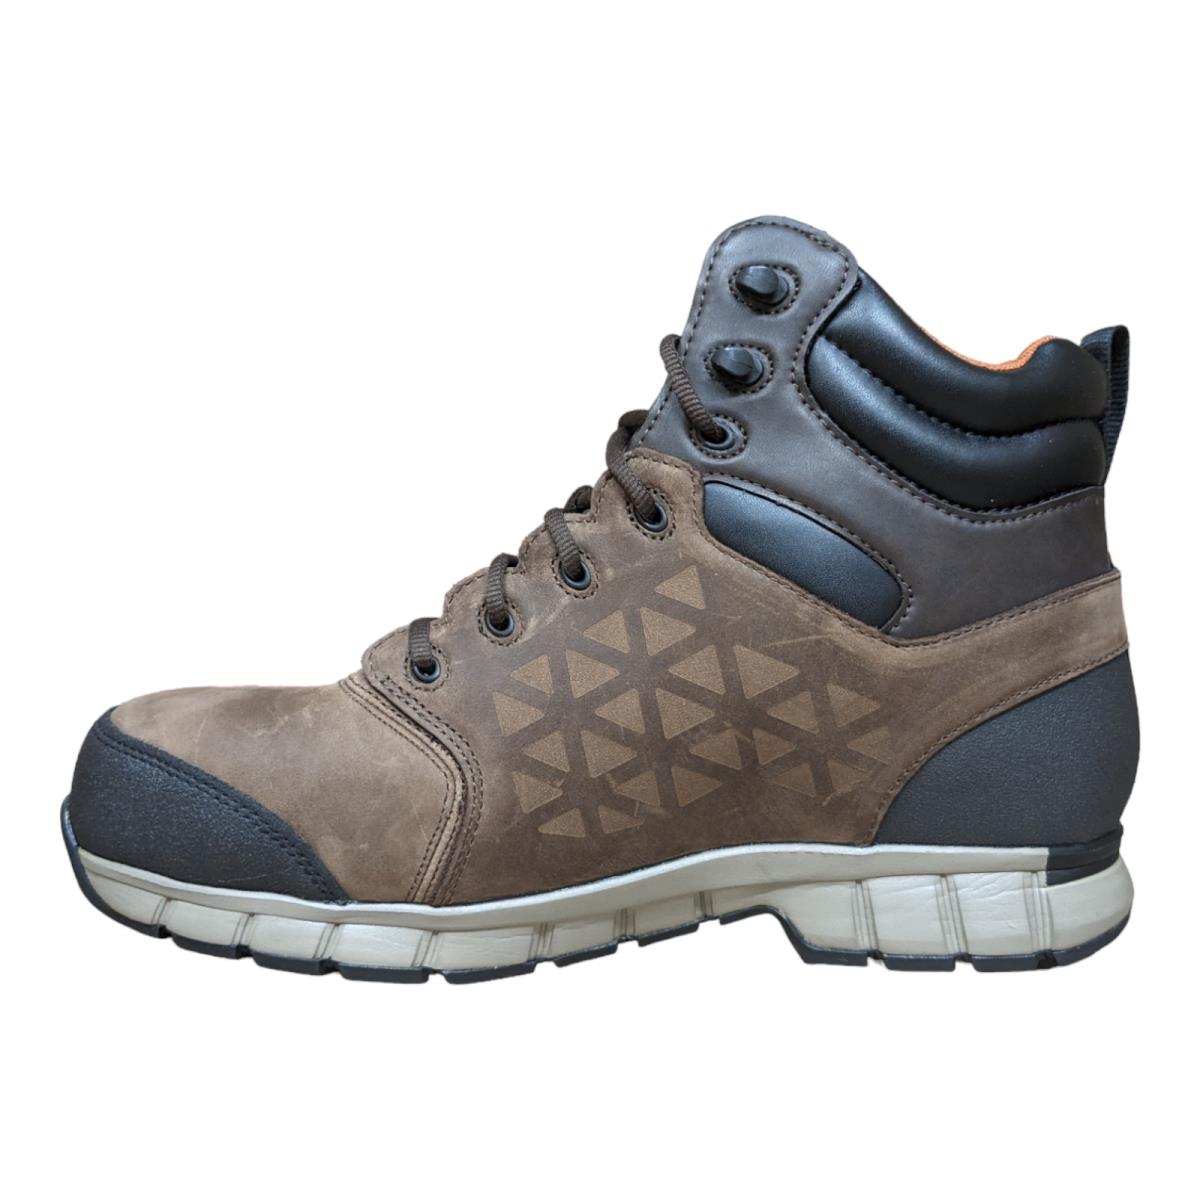 Reebok Men`s Sublite Cushion Work Water Proof - US Boot Size 13 Brown - RB4606 - Brown